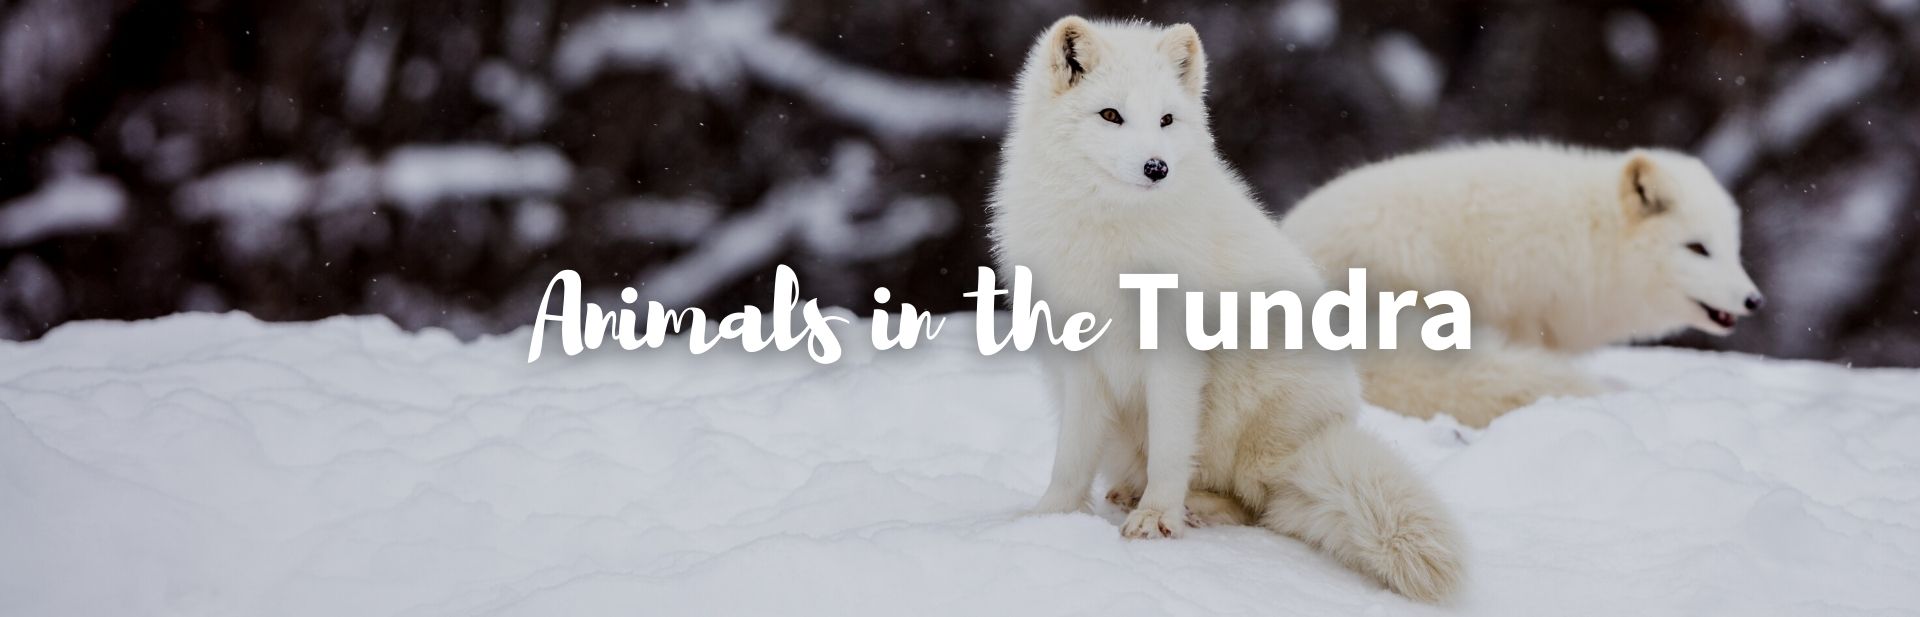 20 Amazing Animals in the Tundra (Facts & Photos)